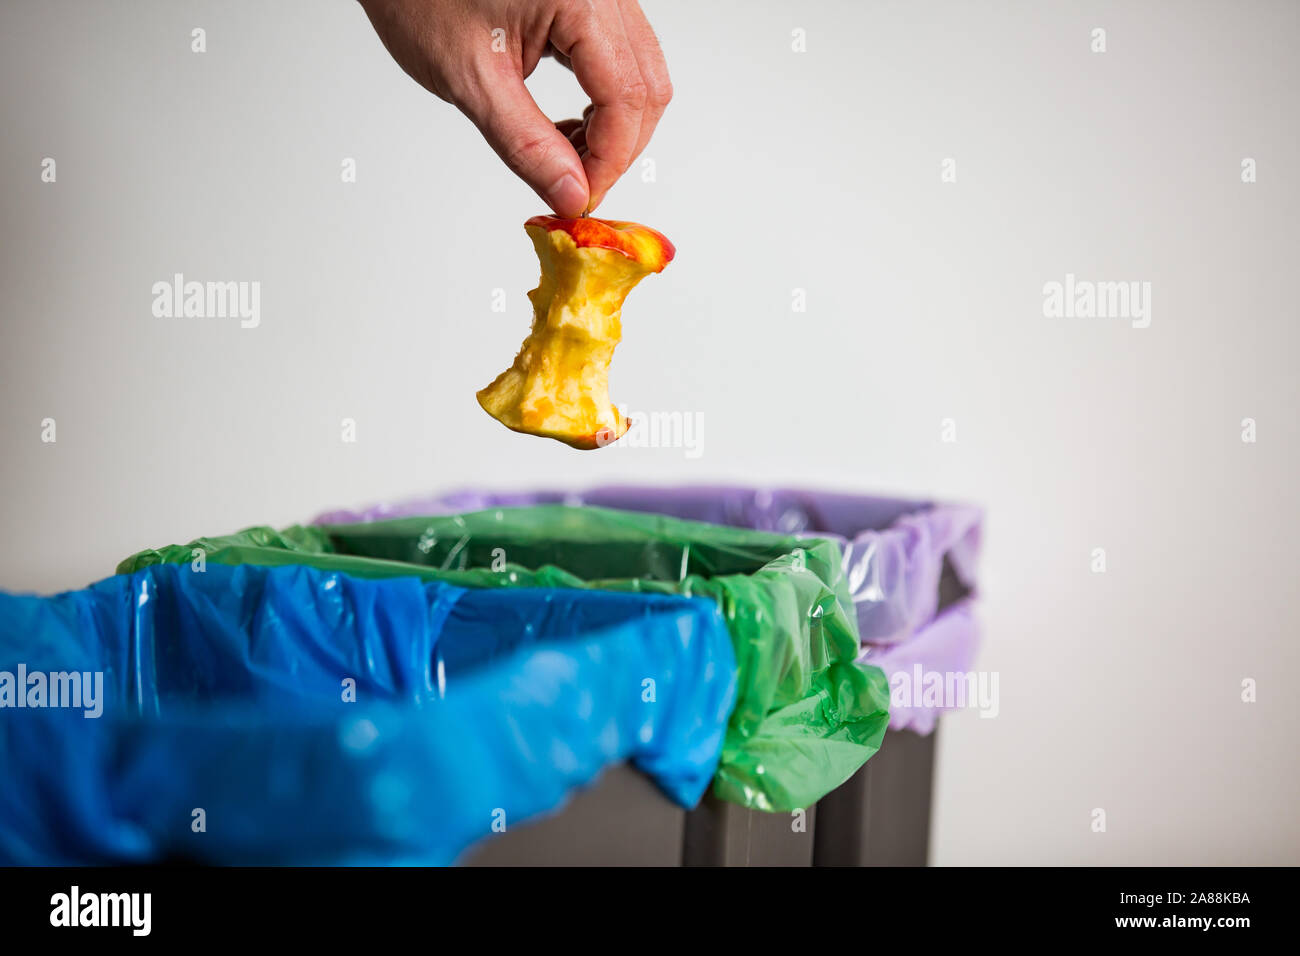 Hand putting apple stub in recycling bio bin. Person in a house kitchen separating waste. Black trash bin with green bag and recycling symbol. Stock Photo